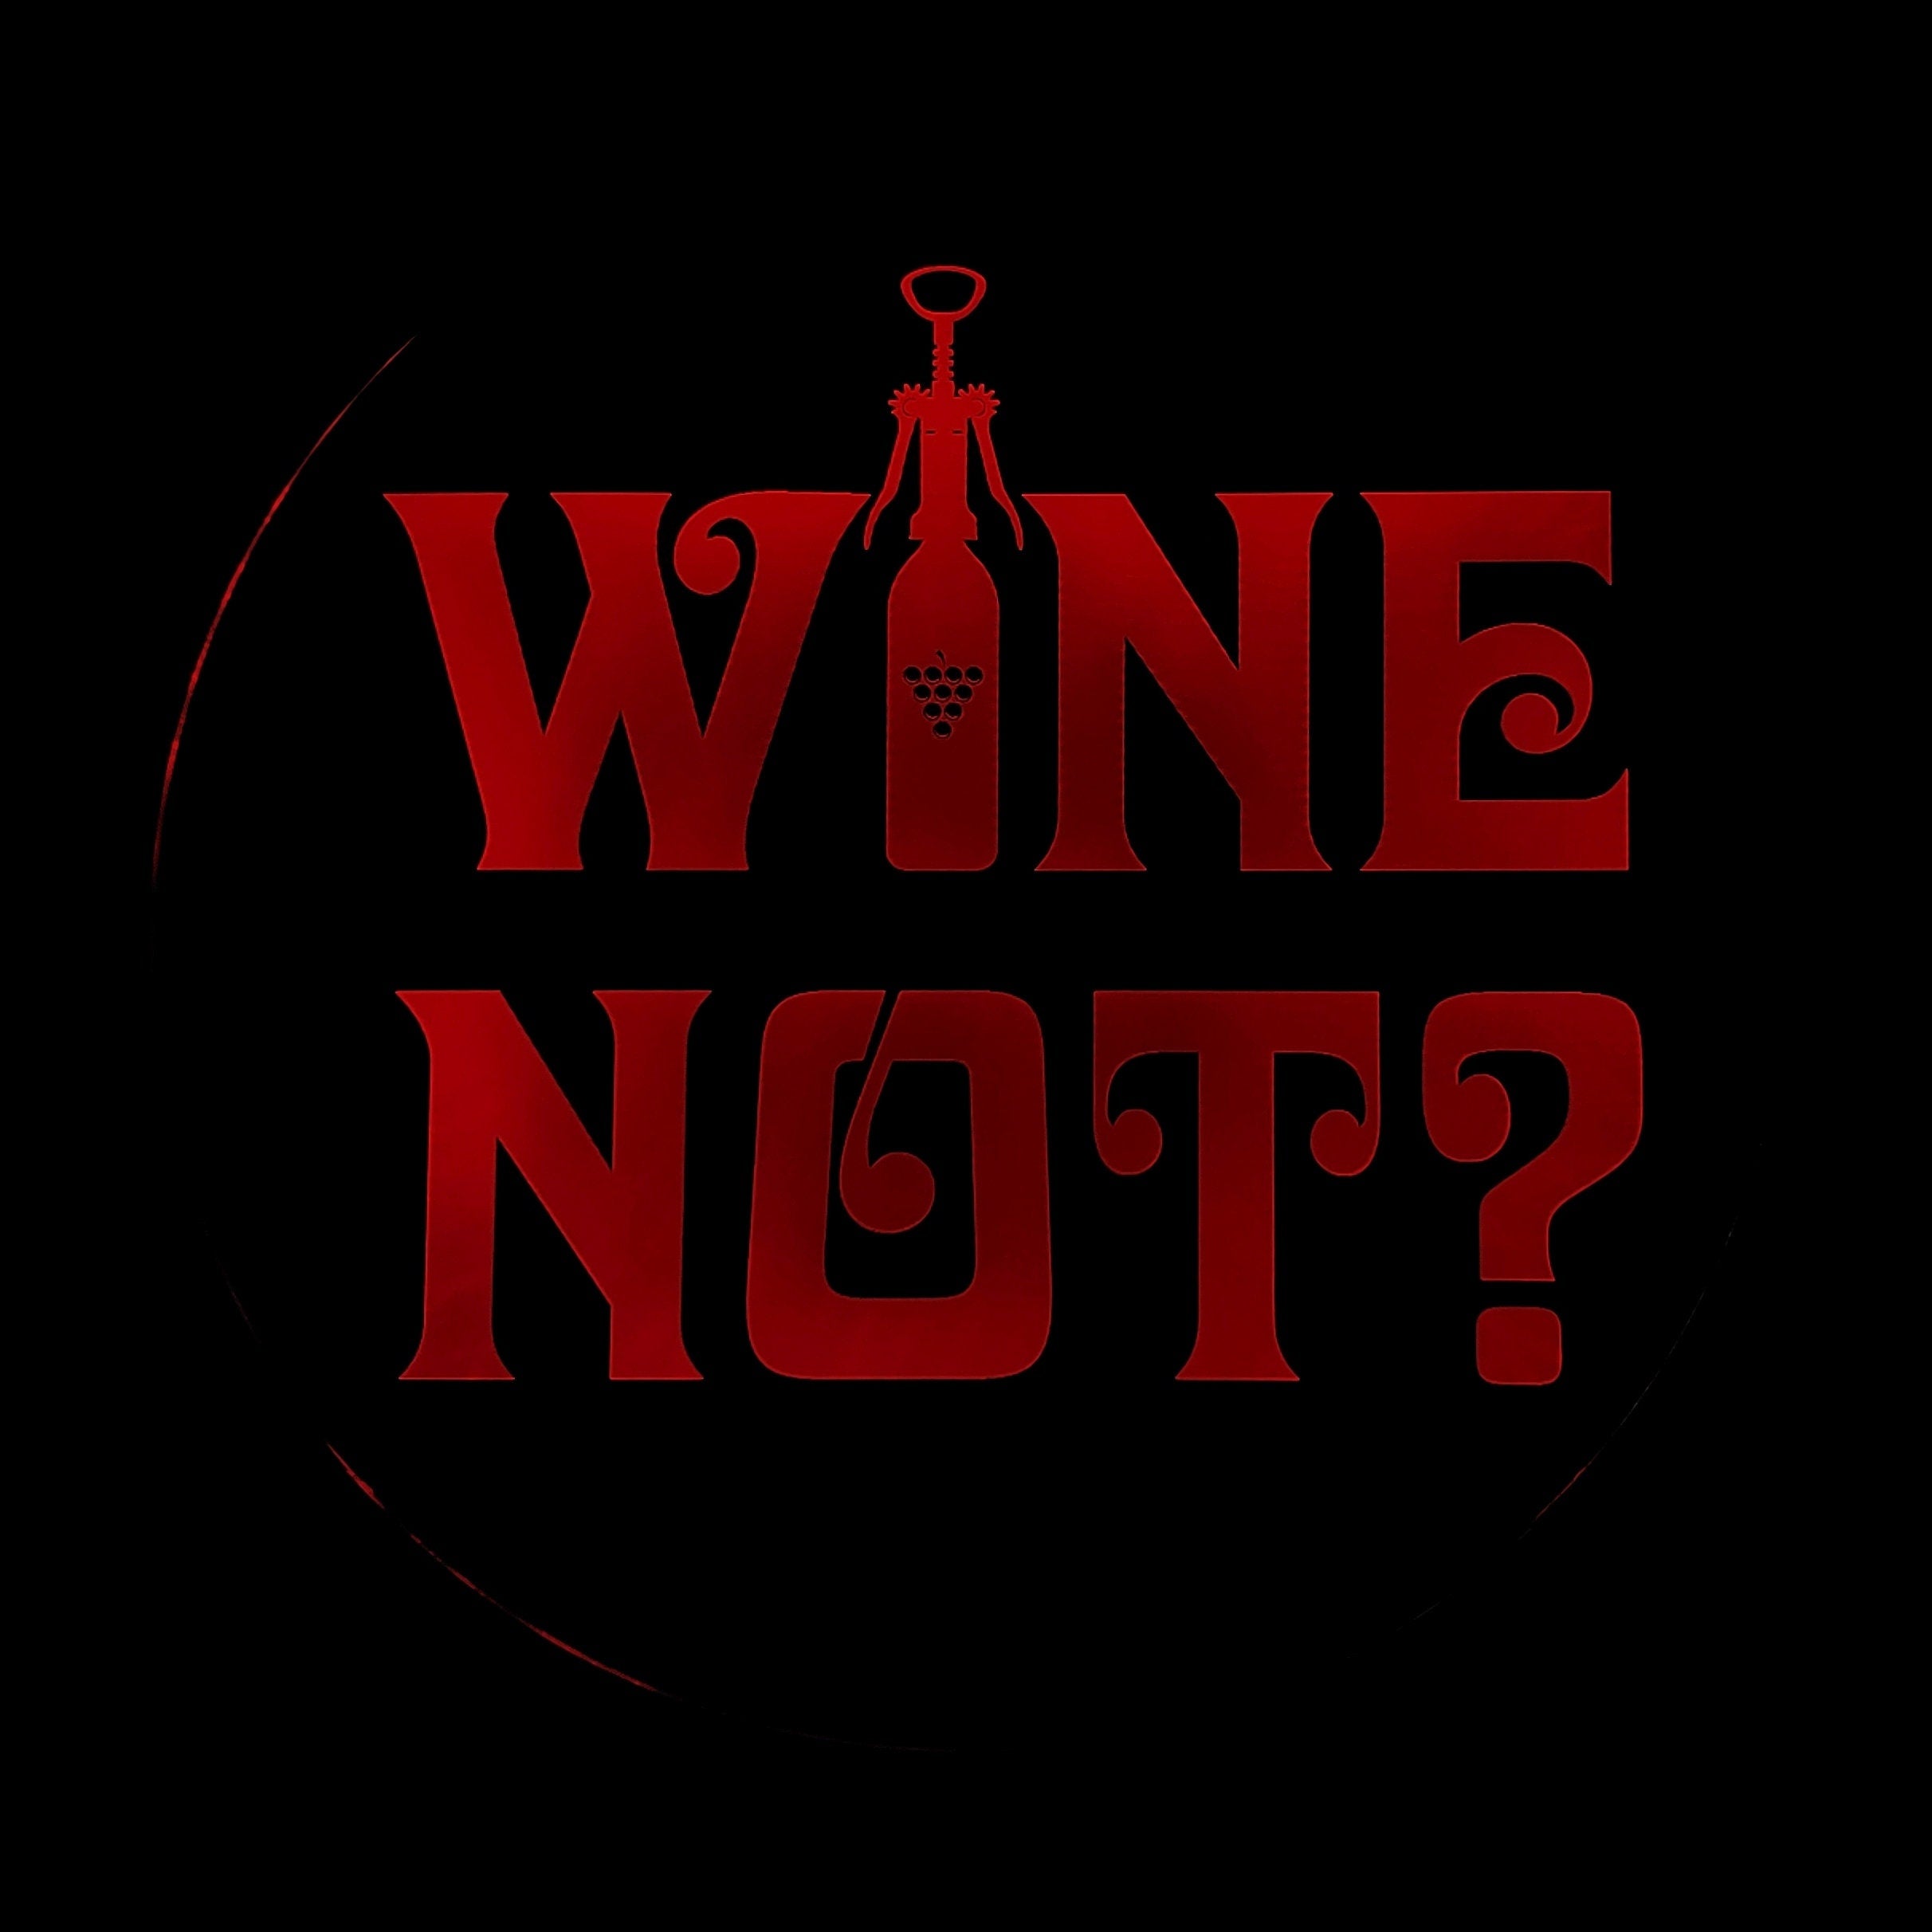 Wine Not? LED Wall Sign Neon Like - Color Changing Remote Control - 6 Sizes Made in USA Free Shipping